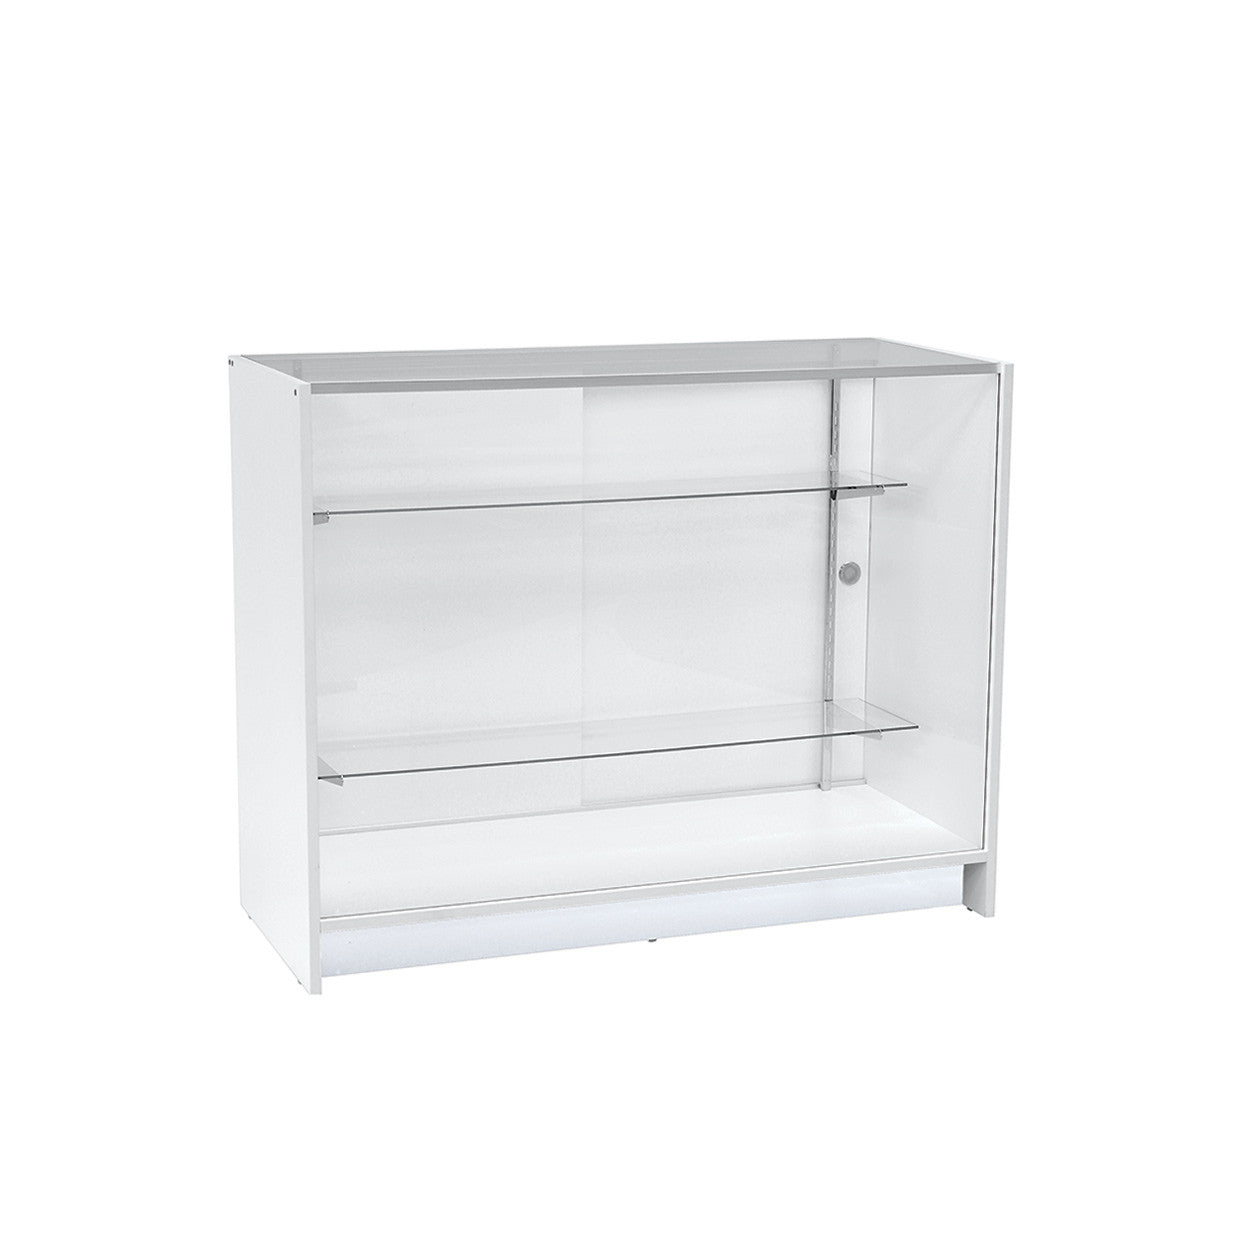 Counter Showcase Glass Top with 2 Shelves - White W1200 x D508 x H965